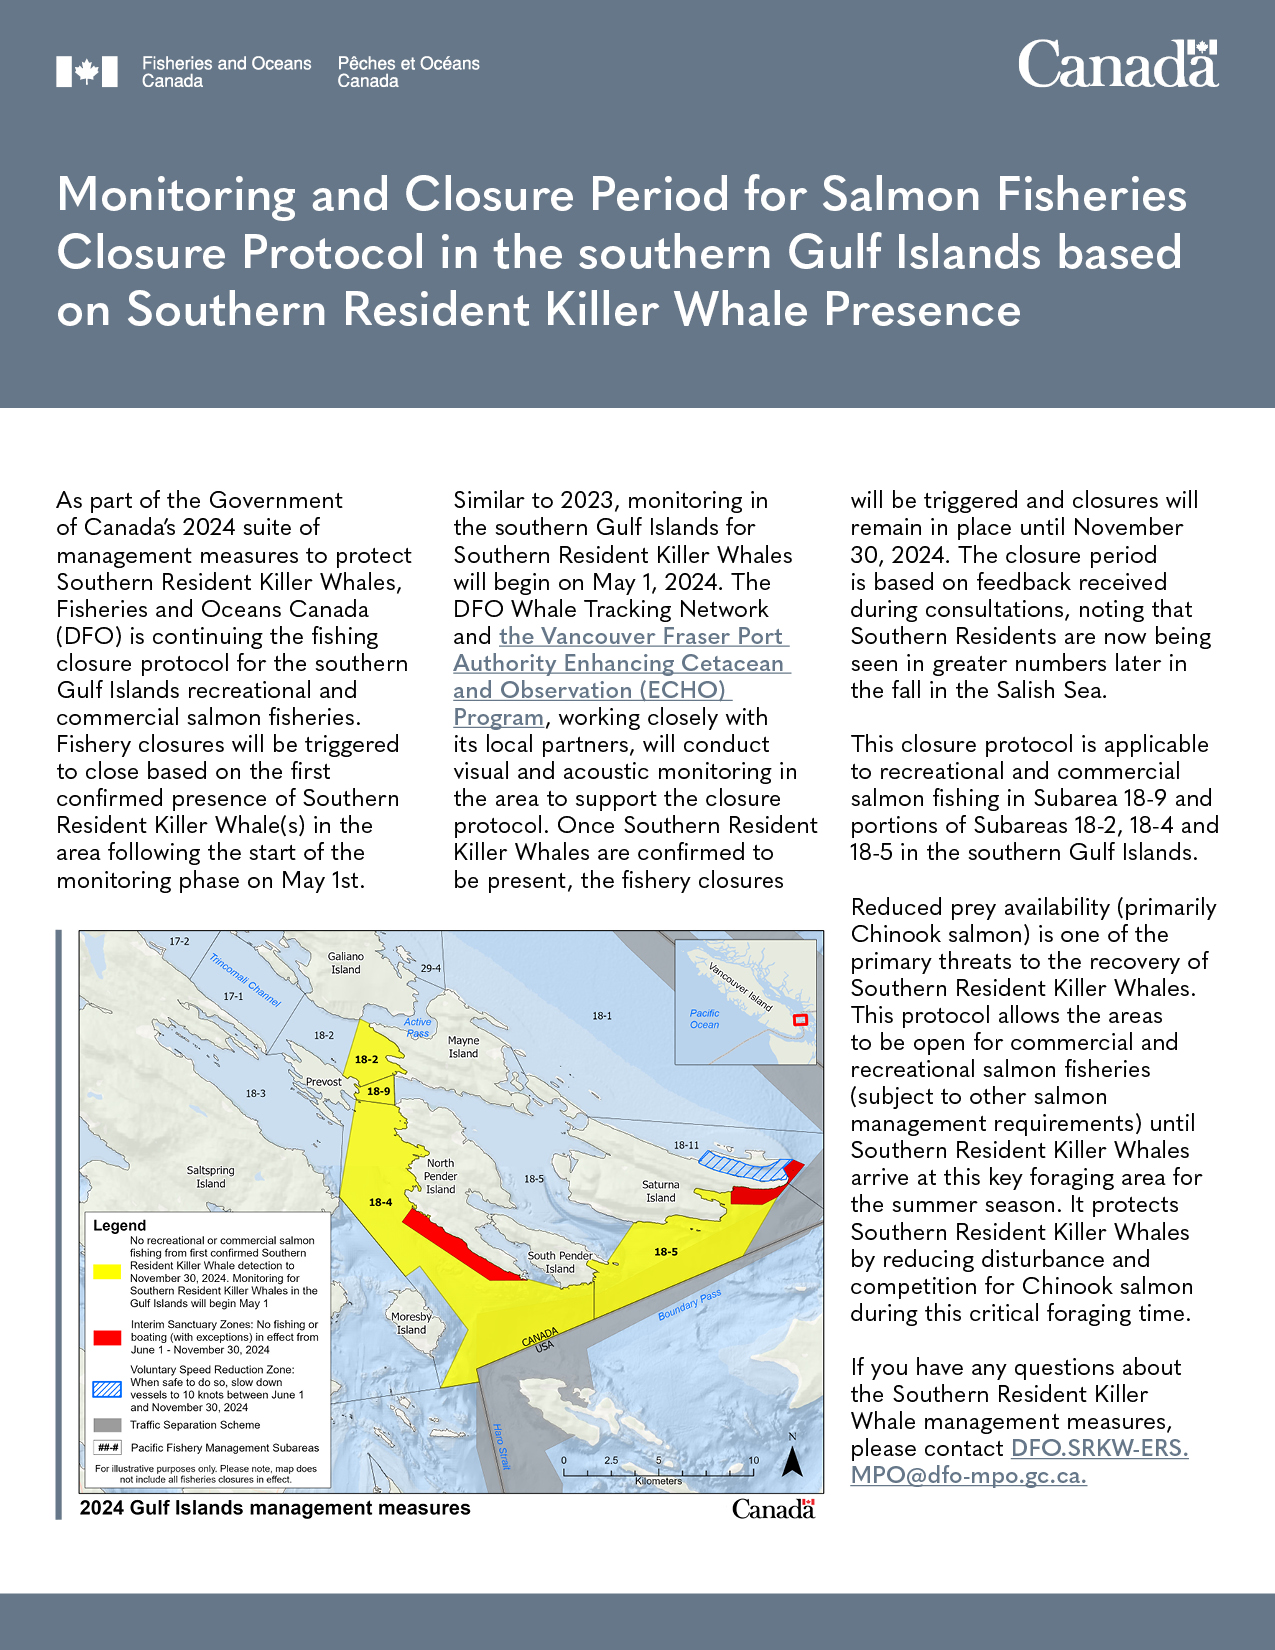 Infographic: Earlier monitoring start date for salmon fisheries closures protocol in the Gulf Islands based on Southern Resident Killer Whale presence